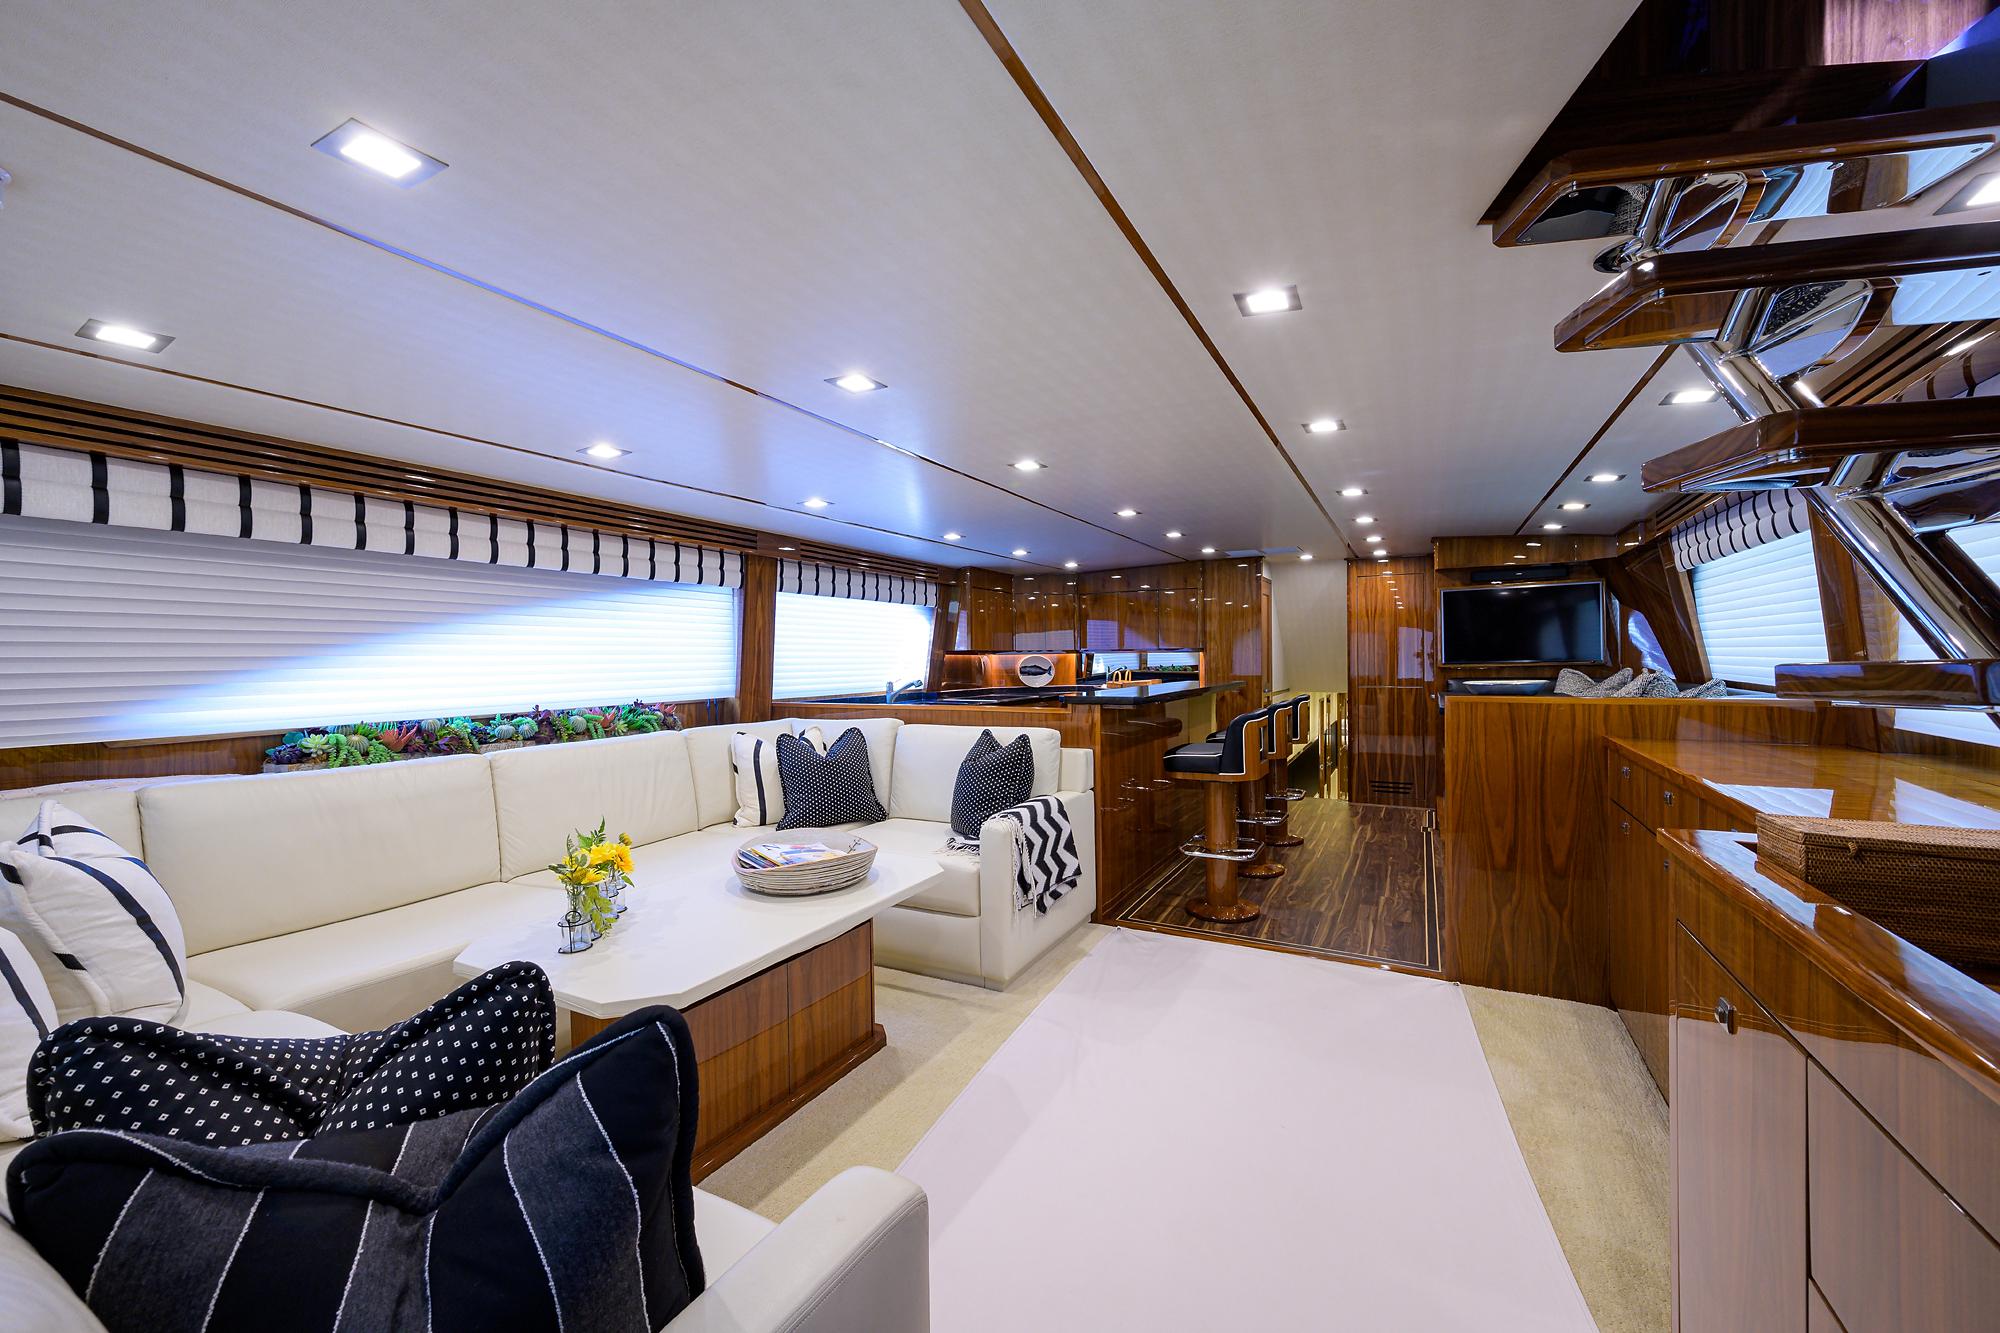 2017 Viking 80 MIRAGE - Salon & Galley View From Entrance